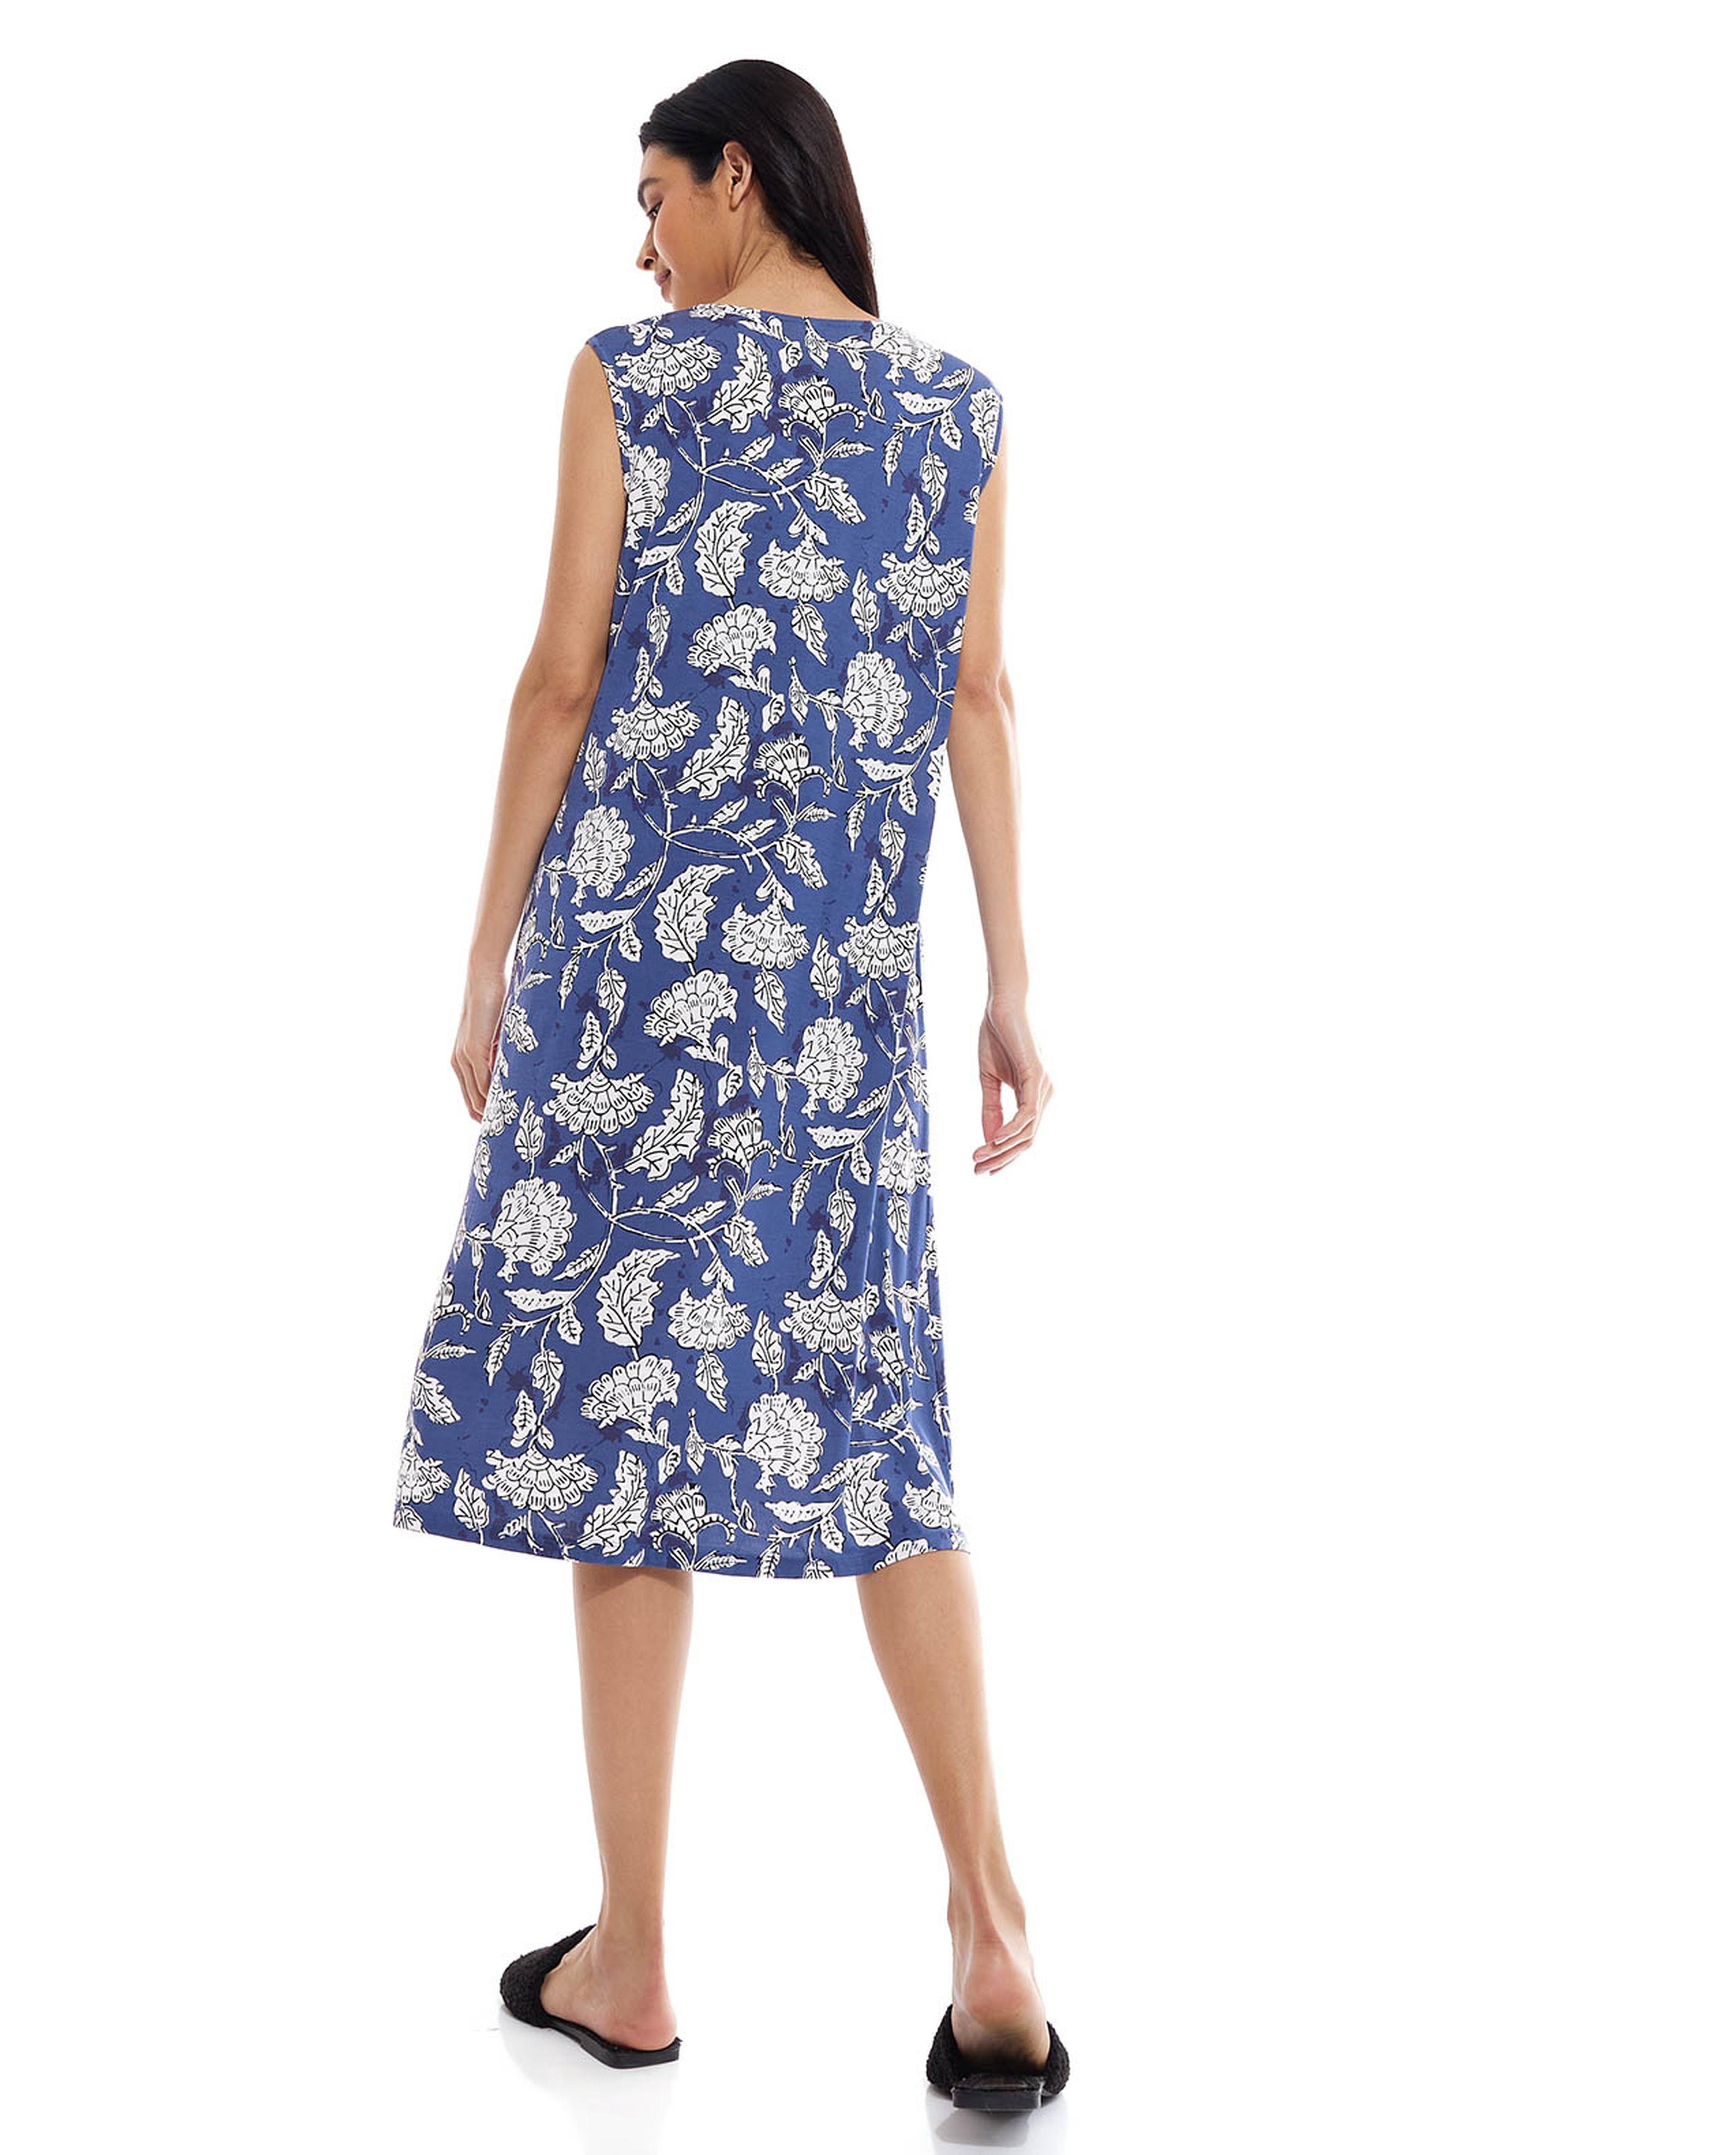 Floral Print Sleeveless Nightgown with V-Neck